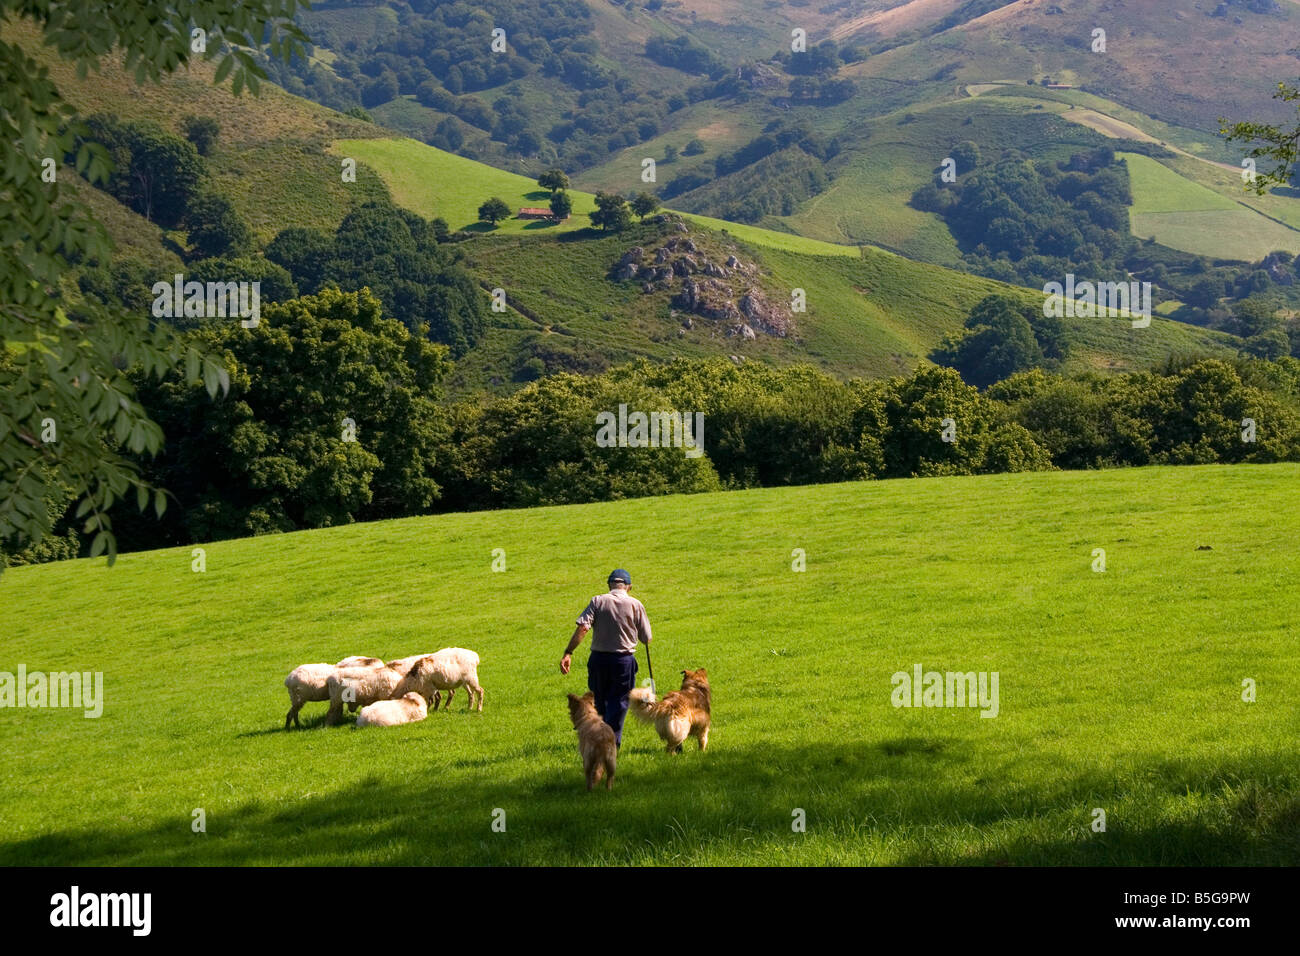 Basque shepherd with dogs and sheep in the Baztan Valley of the Navarre region of northern Spain Stock Photo